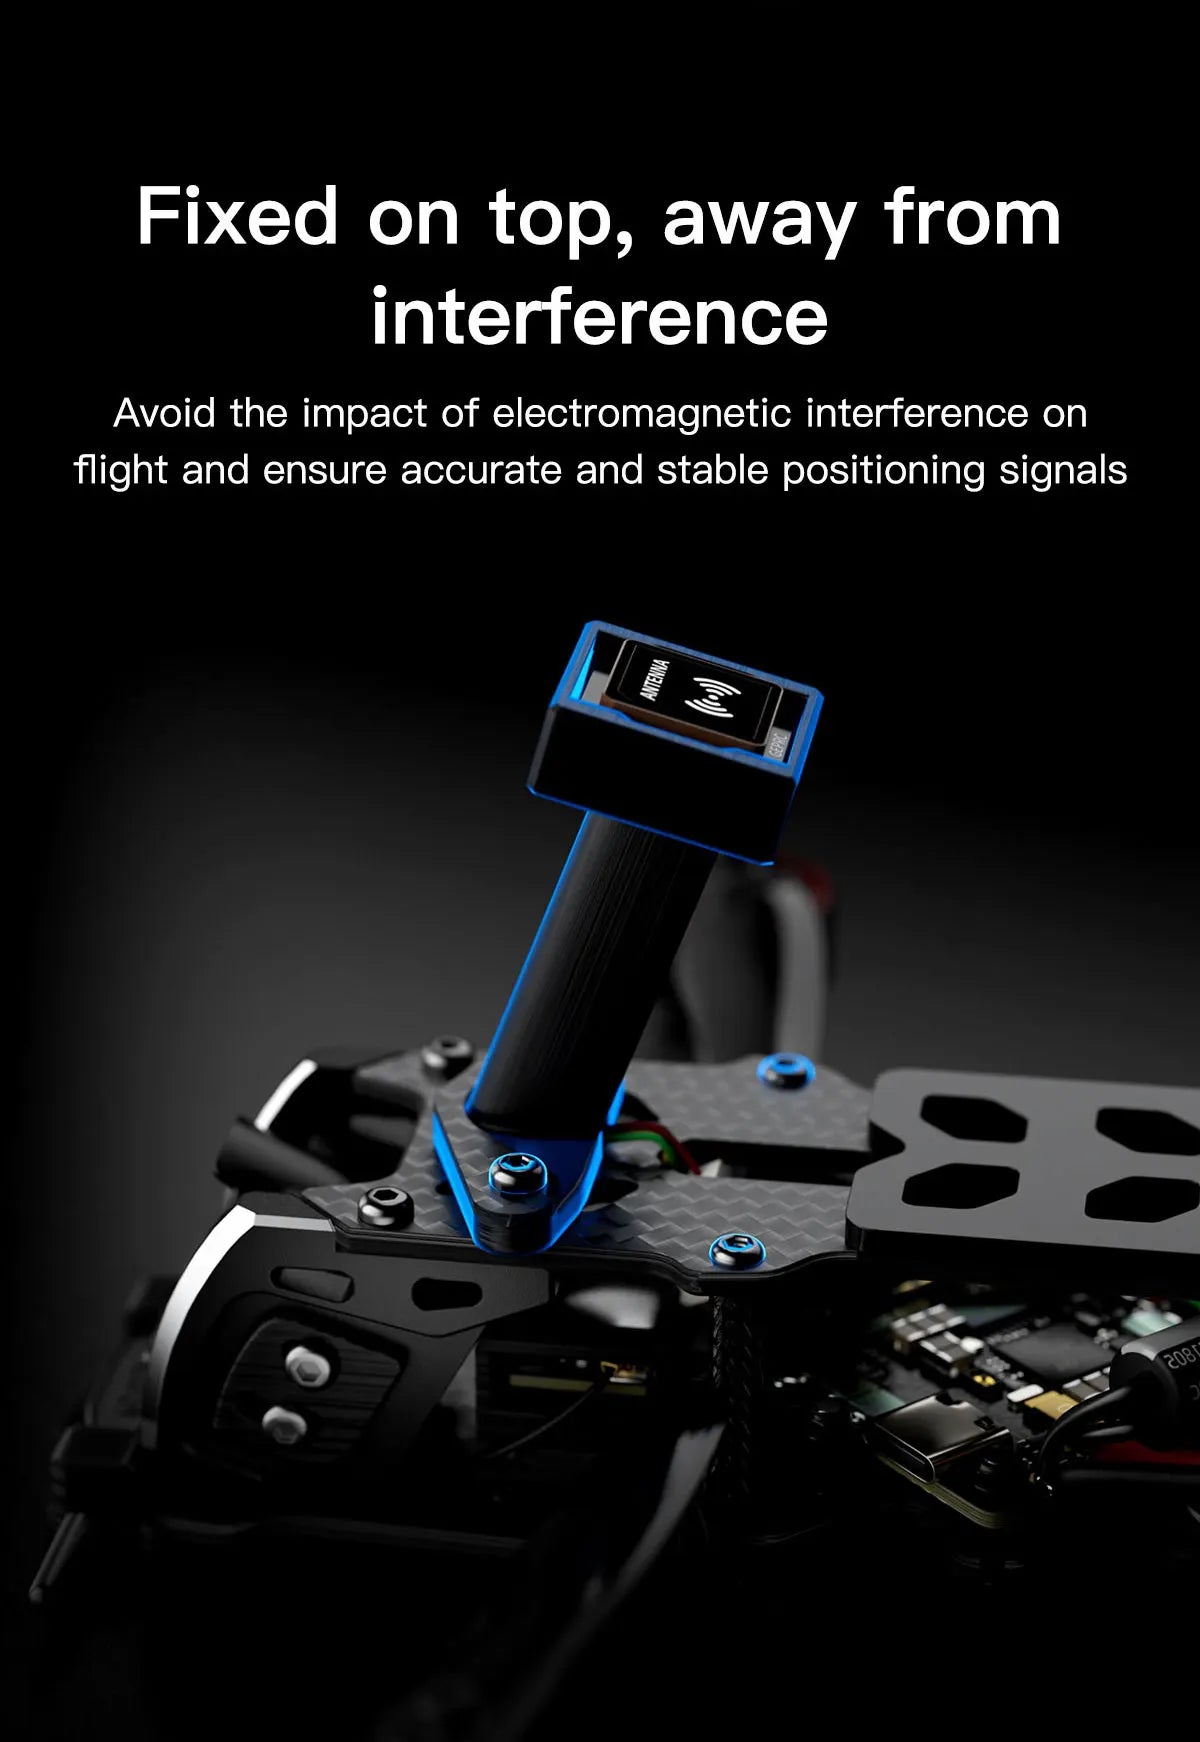 GEPRC Tern-LR40 HD O3 Long Range FPV, fixed on top, away from interference Avoid the impact of electromagnetic interference on flight . ensure accurate